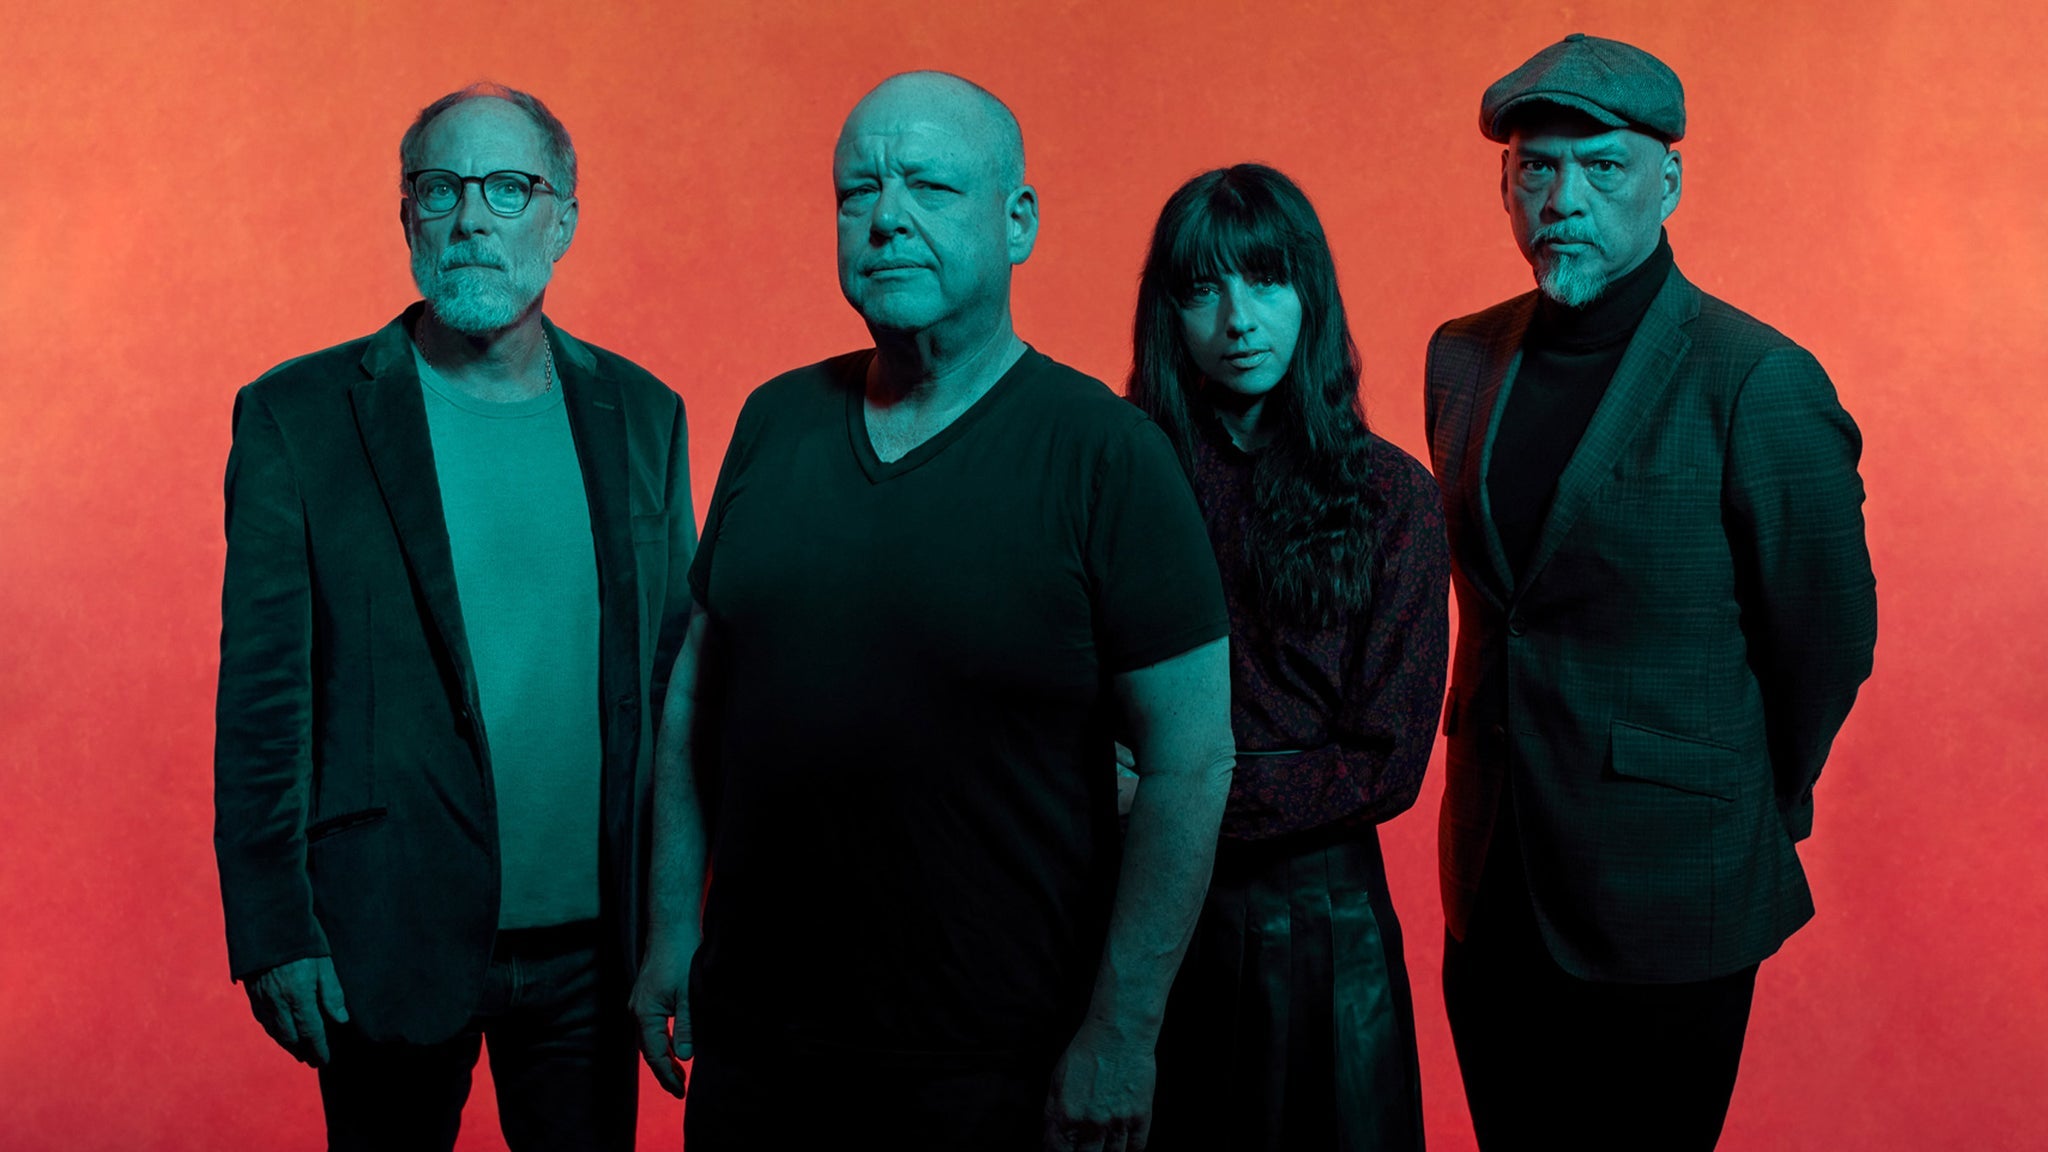 Pixies and Modest Mouse with special guest Cat Power